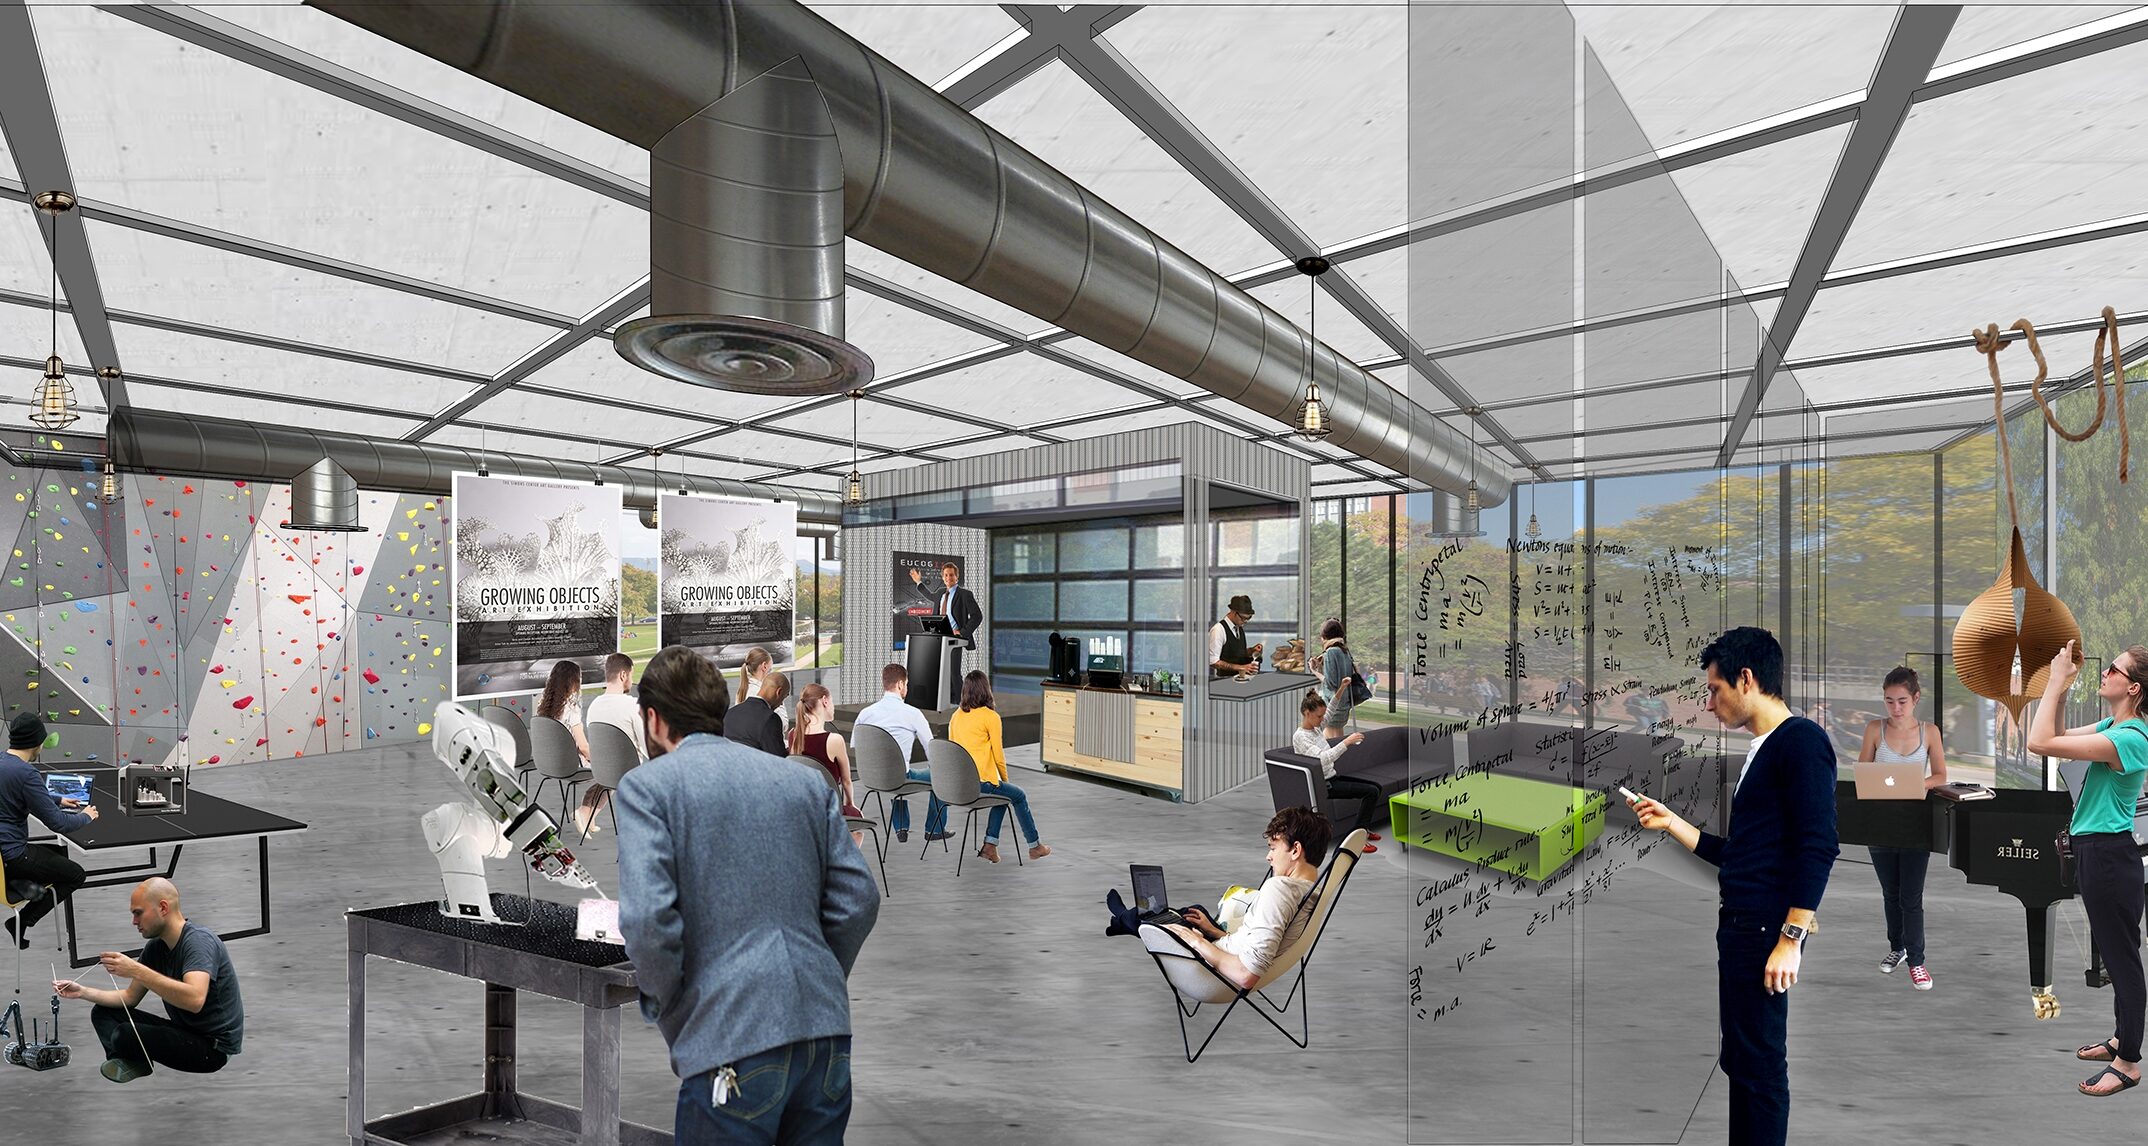 More and more higher education campuses are embracing
group-oriented learning environments that encourage interaction and
collaboration. The design for one community college’s “flex lab” combines a
variety of learning and social amenities that creates a space for students to
connect. – NAC Architecture 